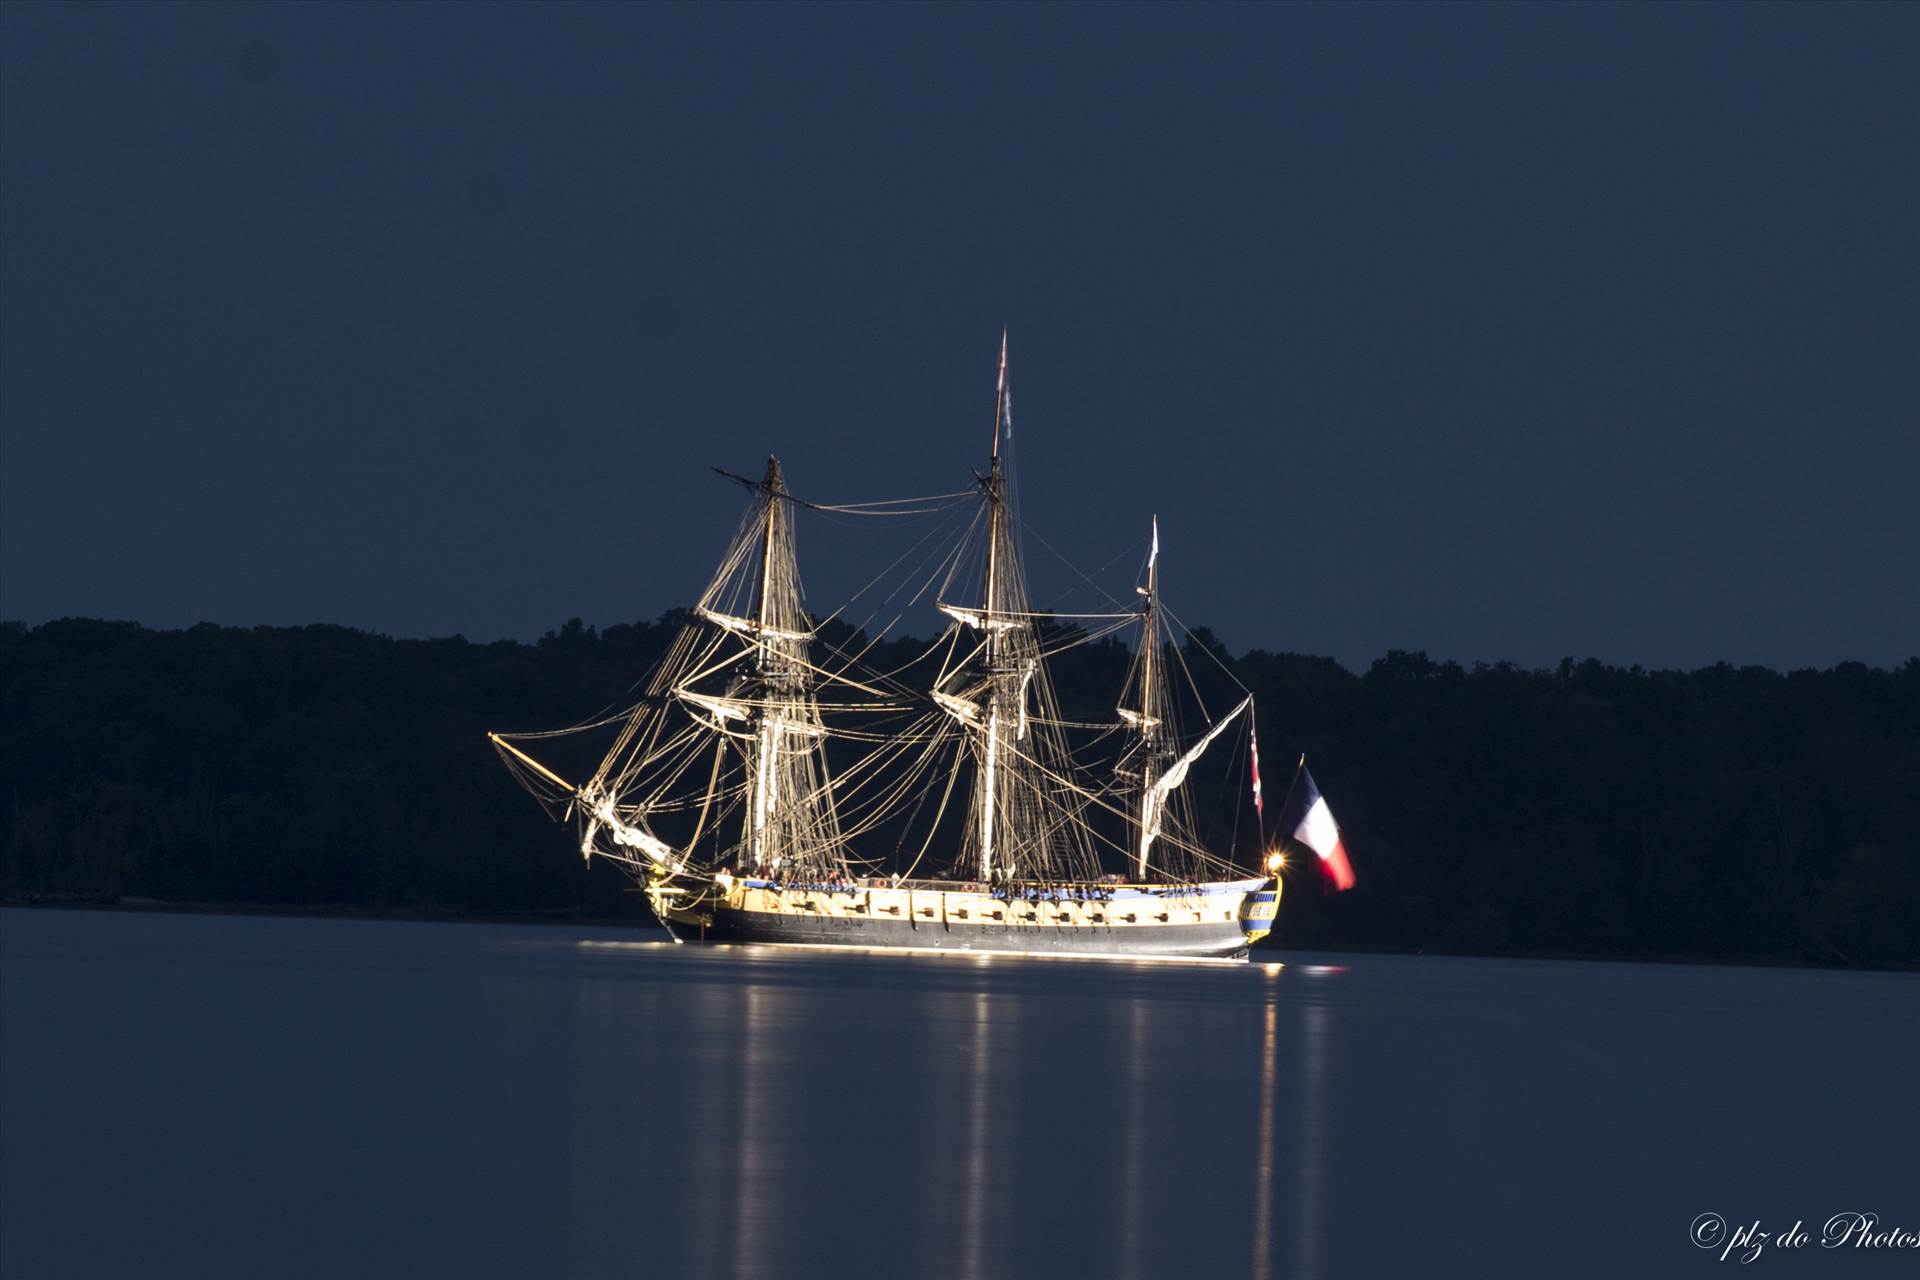 Tall Ships & More - This album is images of tall ships.